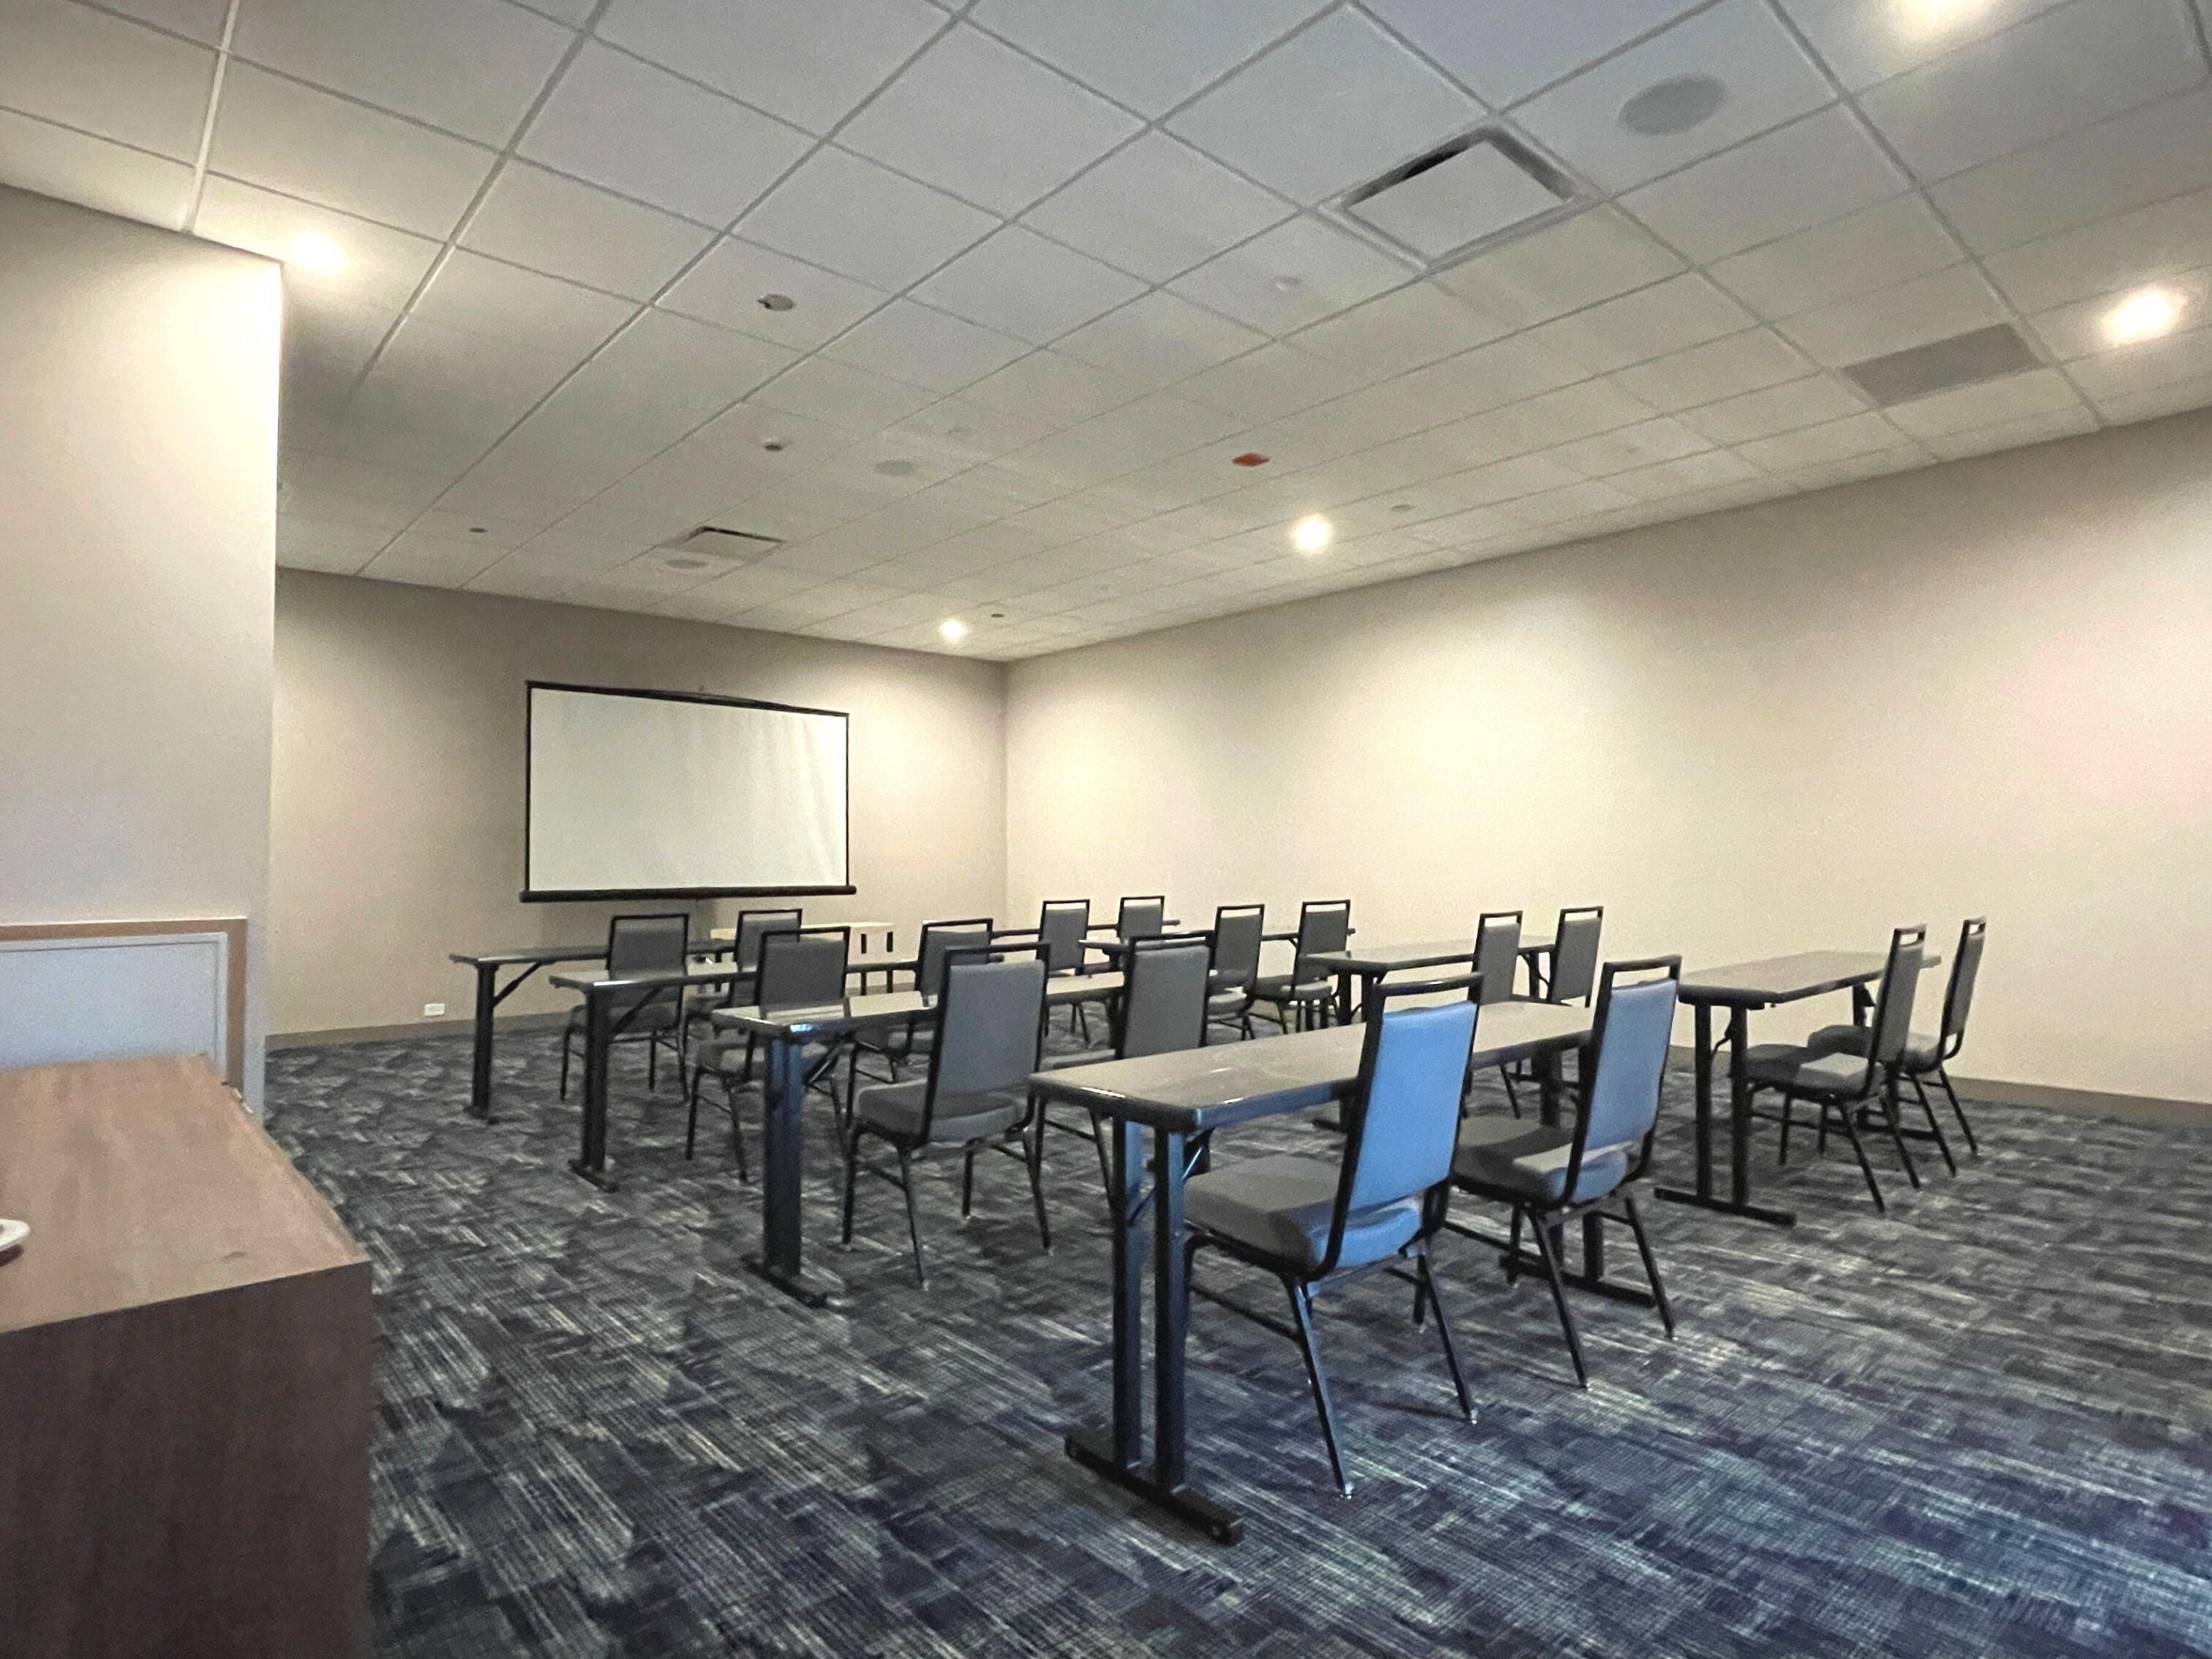 Our hotel features over 1,000-sq-ft of flexible space, ideal for business meetings, bridal showers, family reunions and more!  Work with one of our experienced meeting planners to ensure a seamless and successful event.